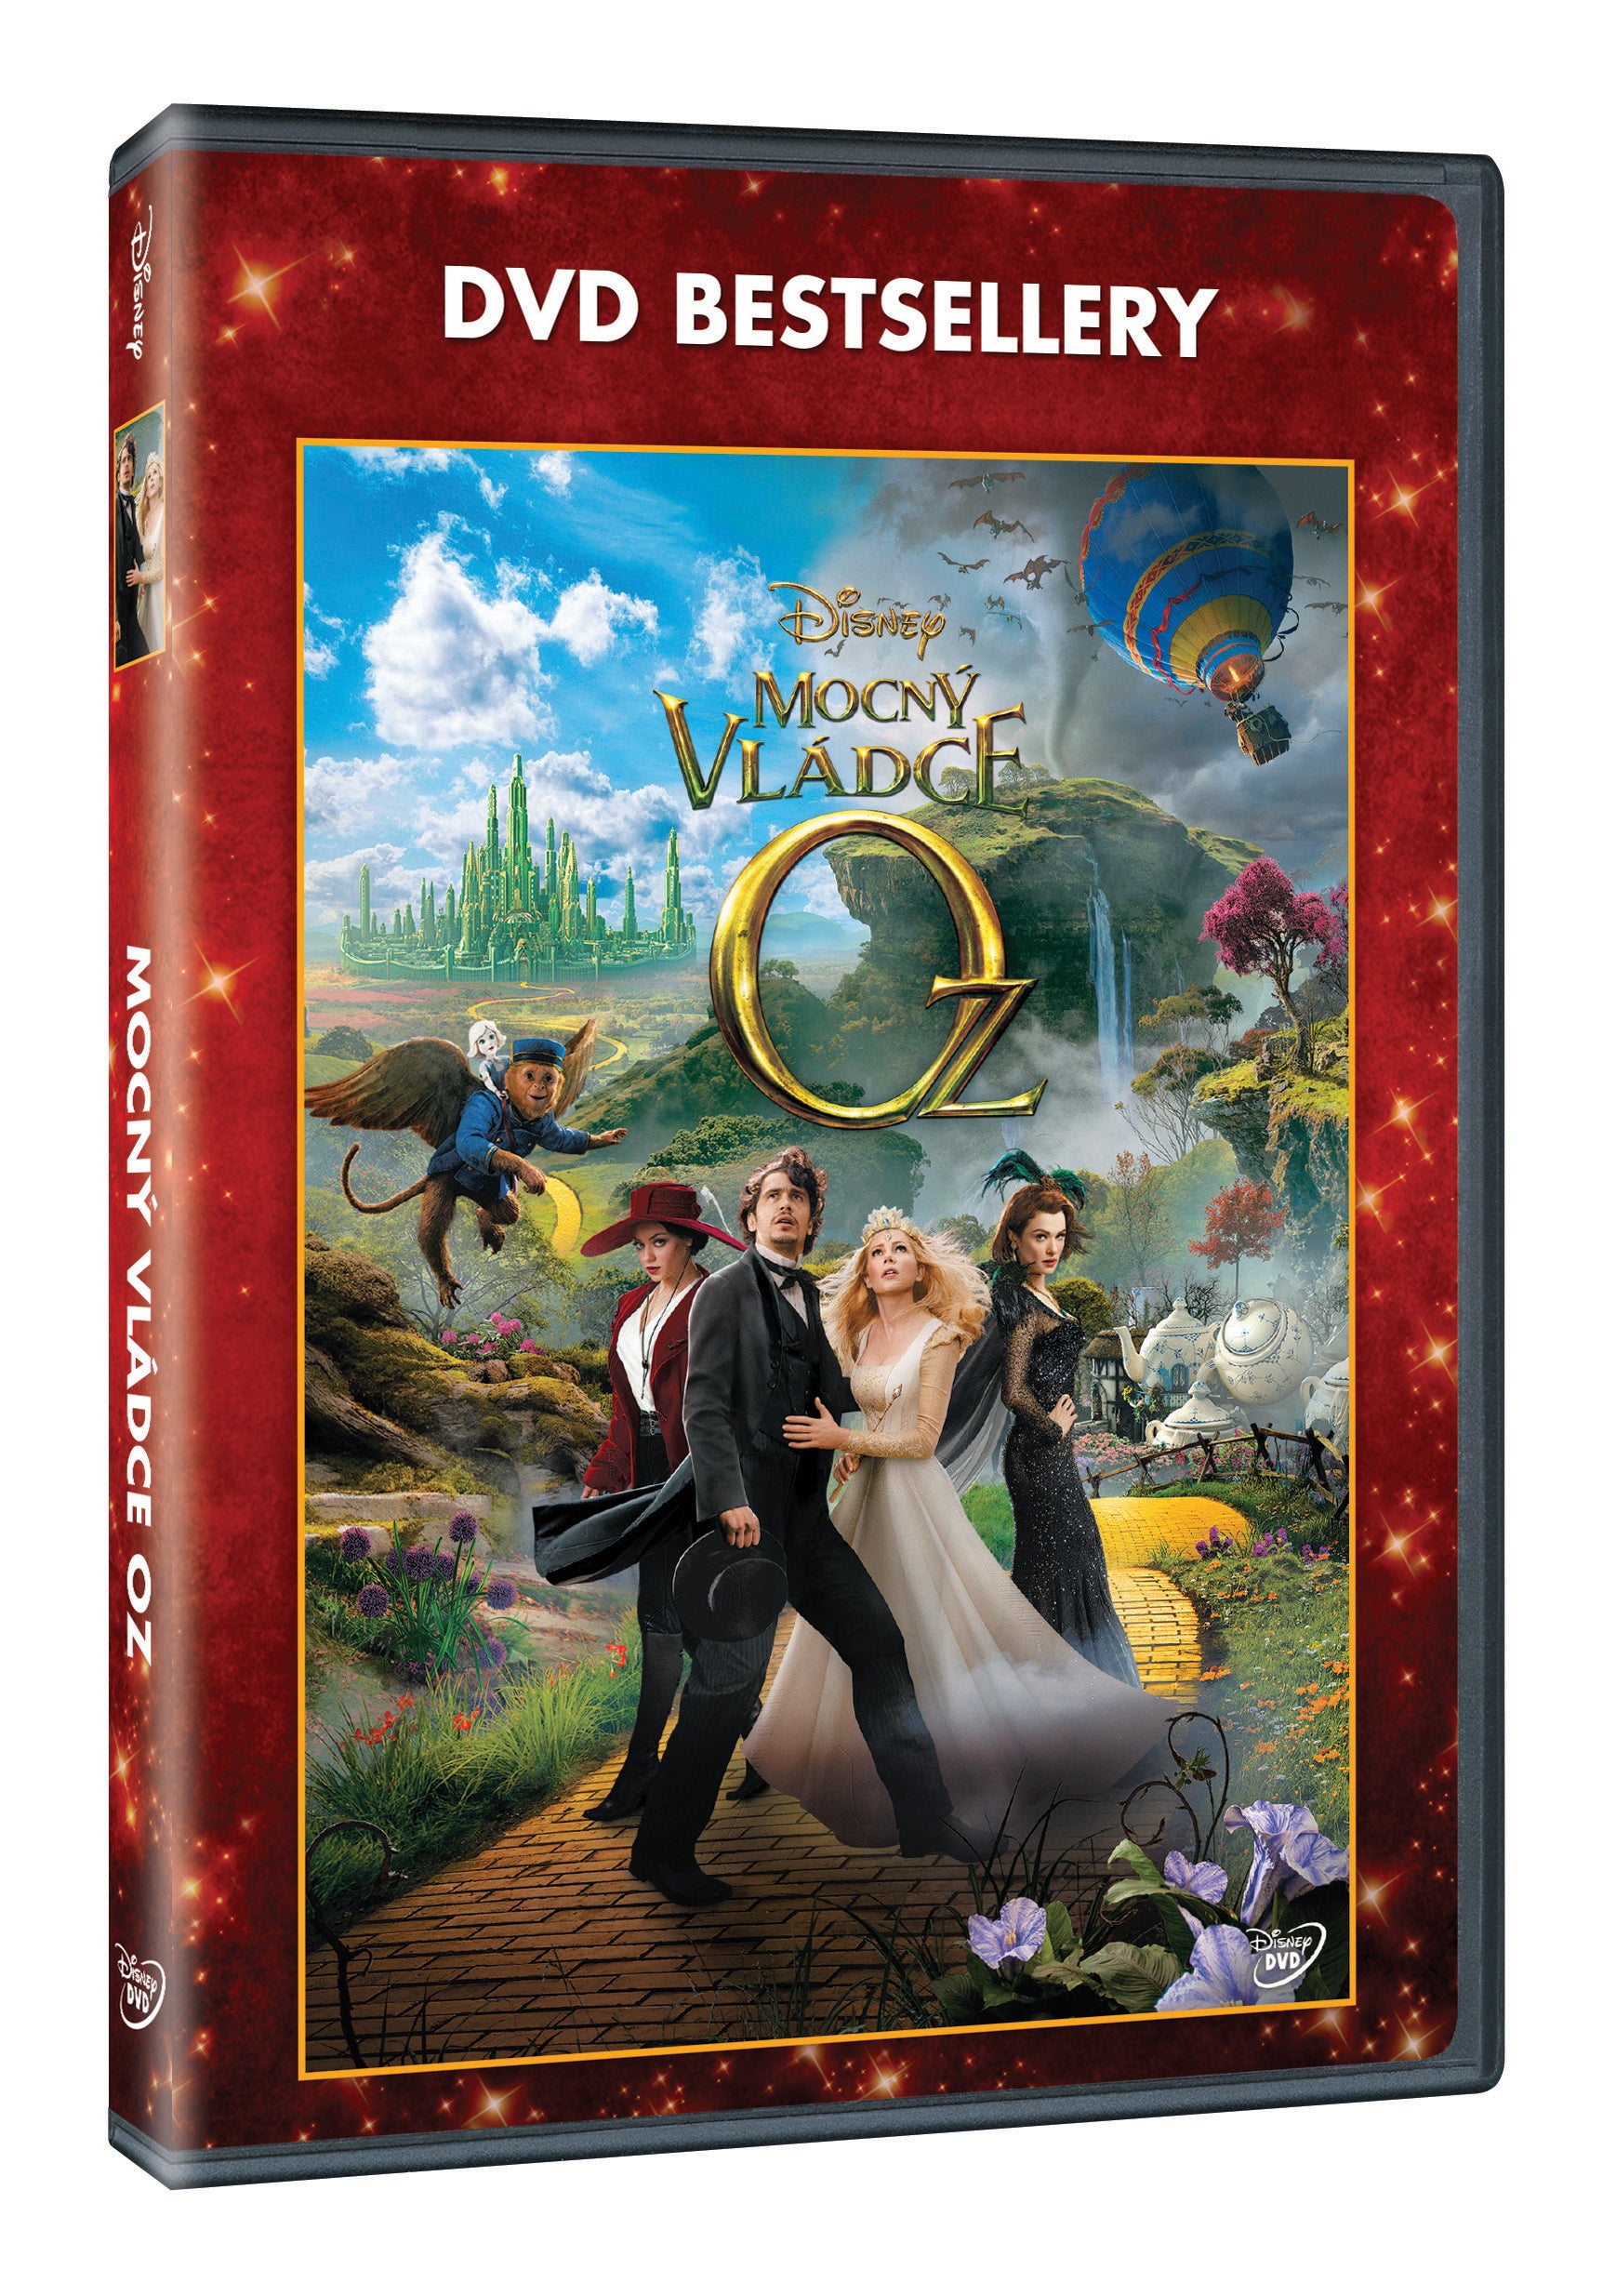 Mocny vladce Oz - DVD bestsellery (Oz: The Great and Powerful)